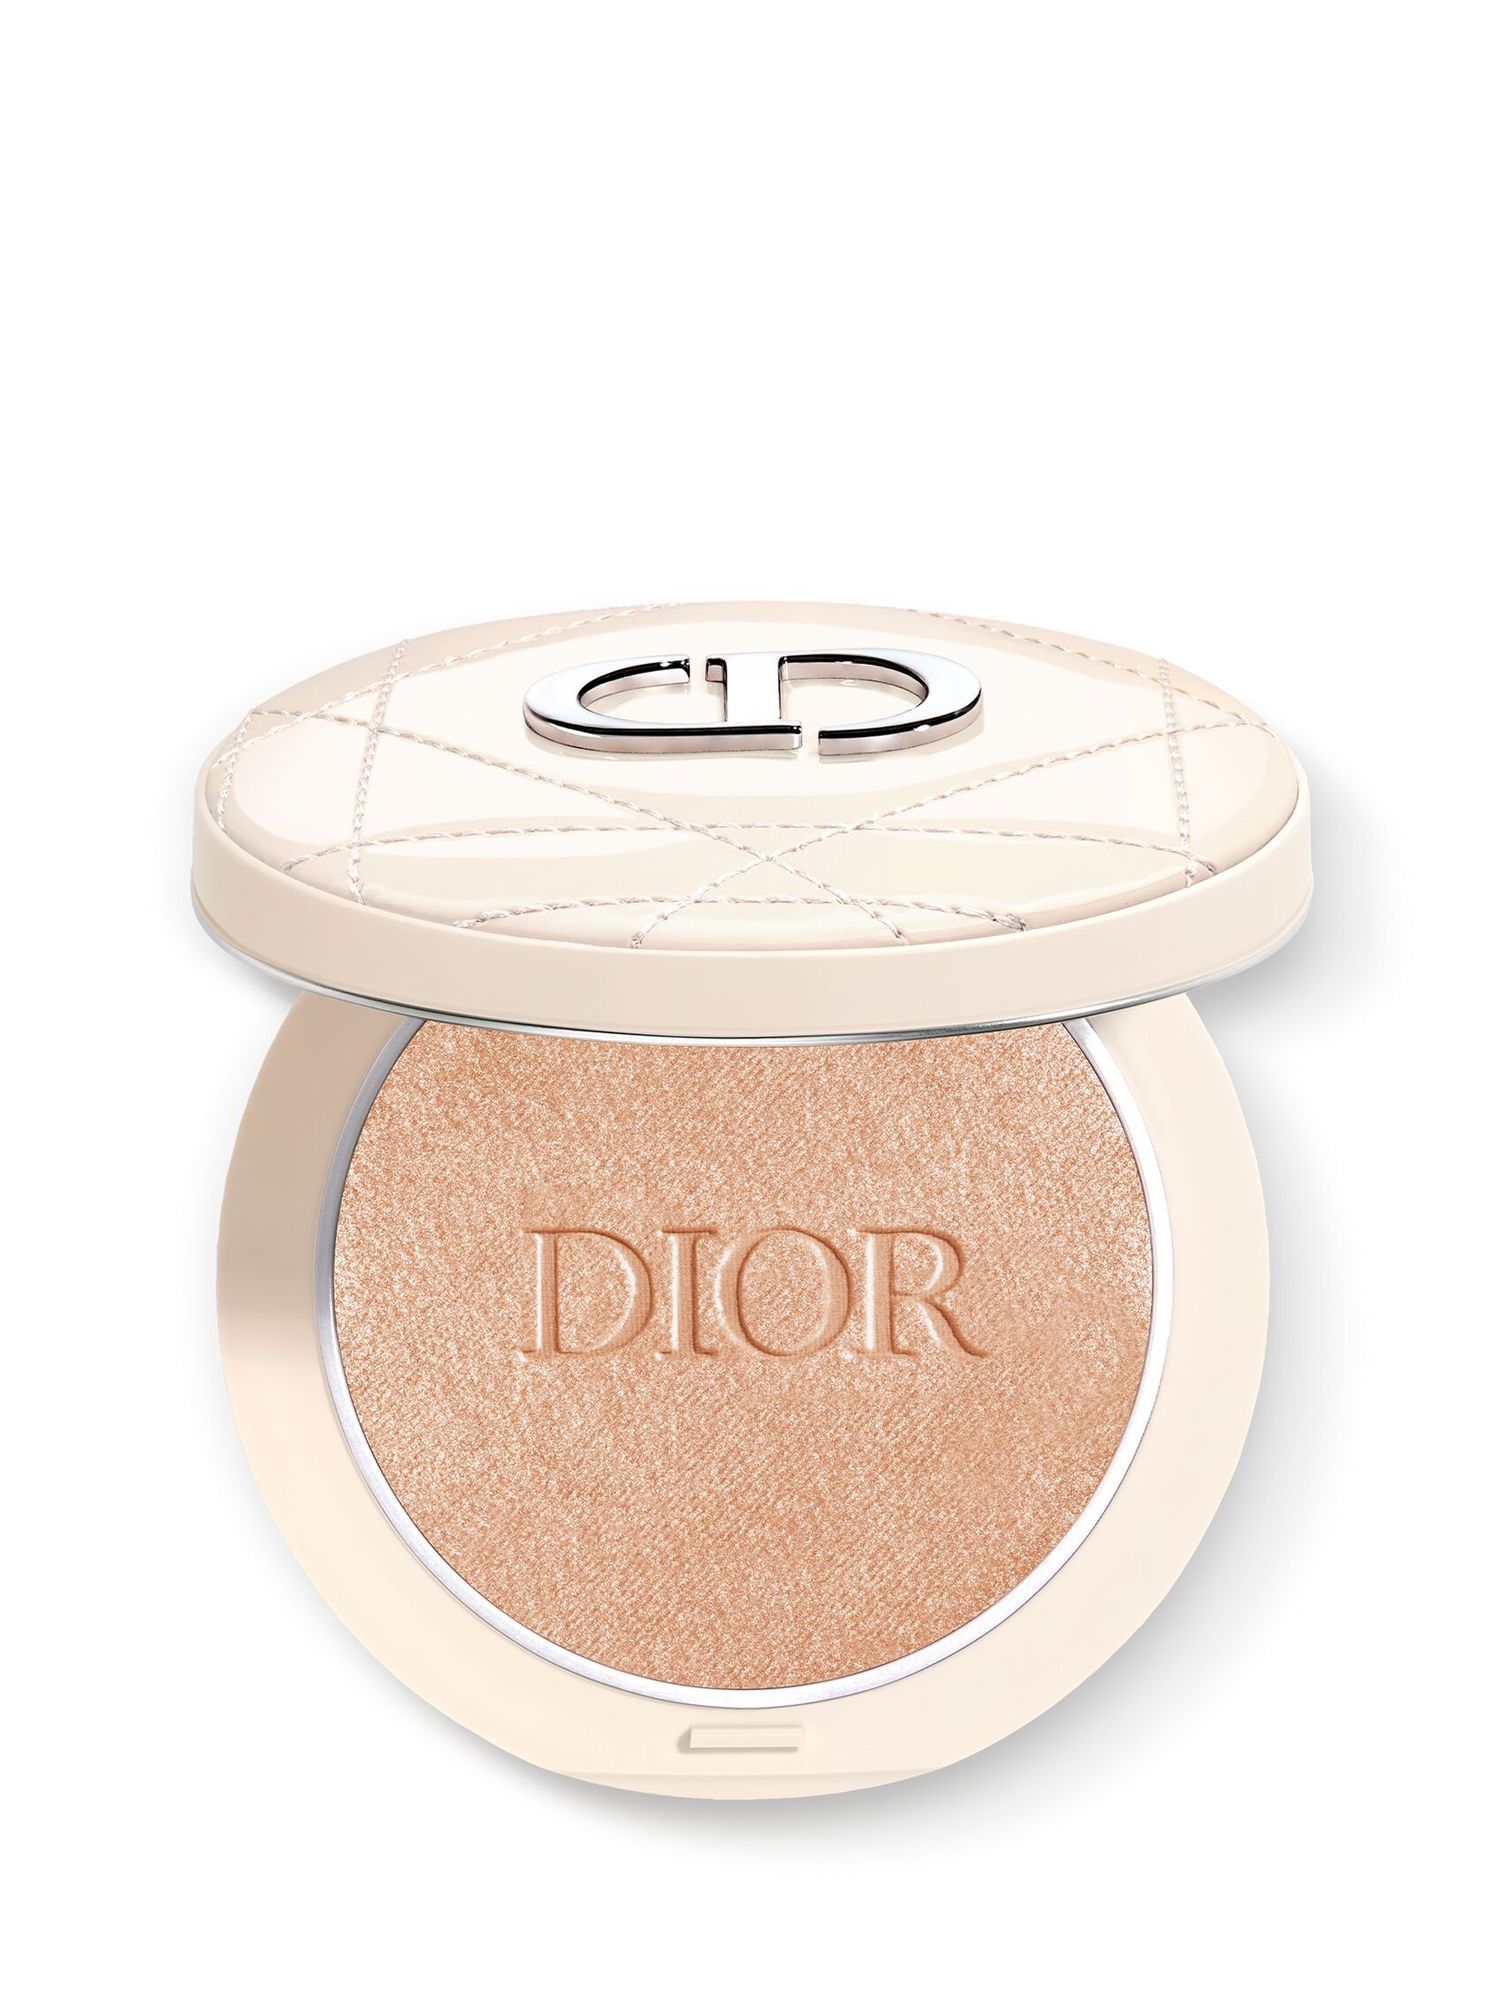 Dior Forever Couture Luminizer Highlighter, 01 Nude Glow